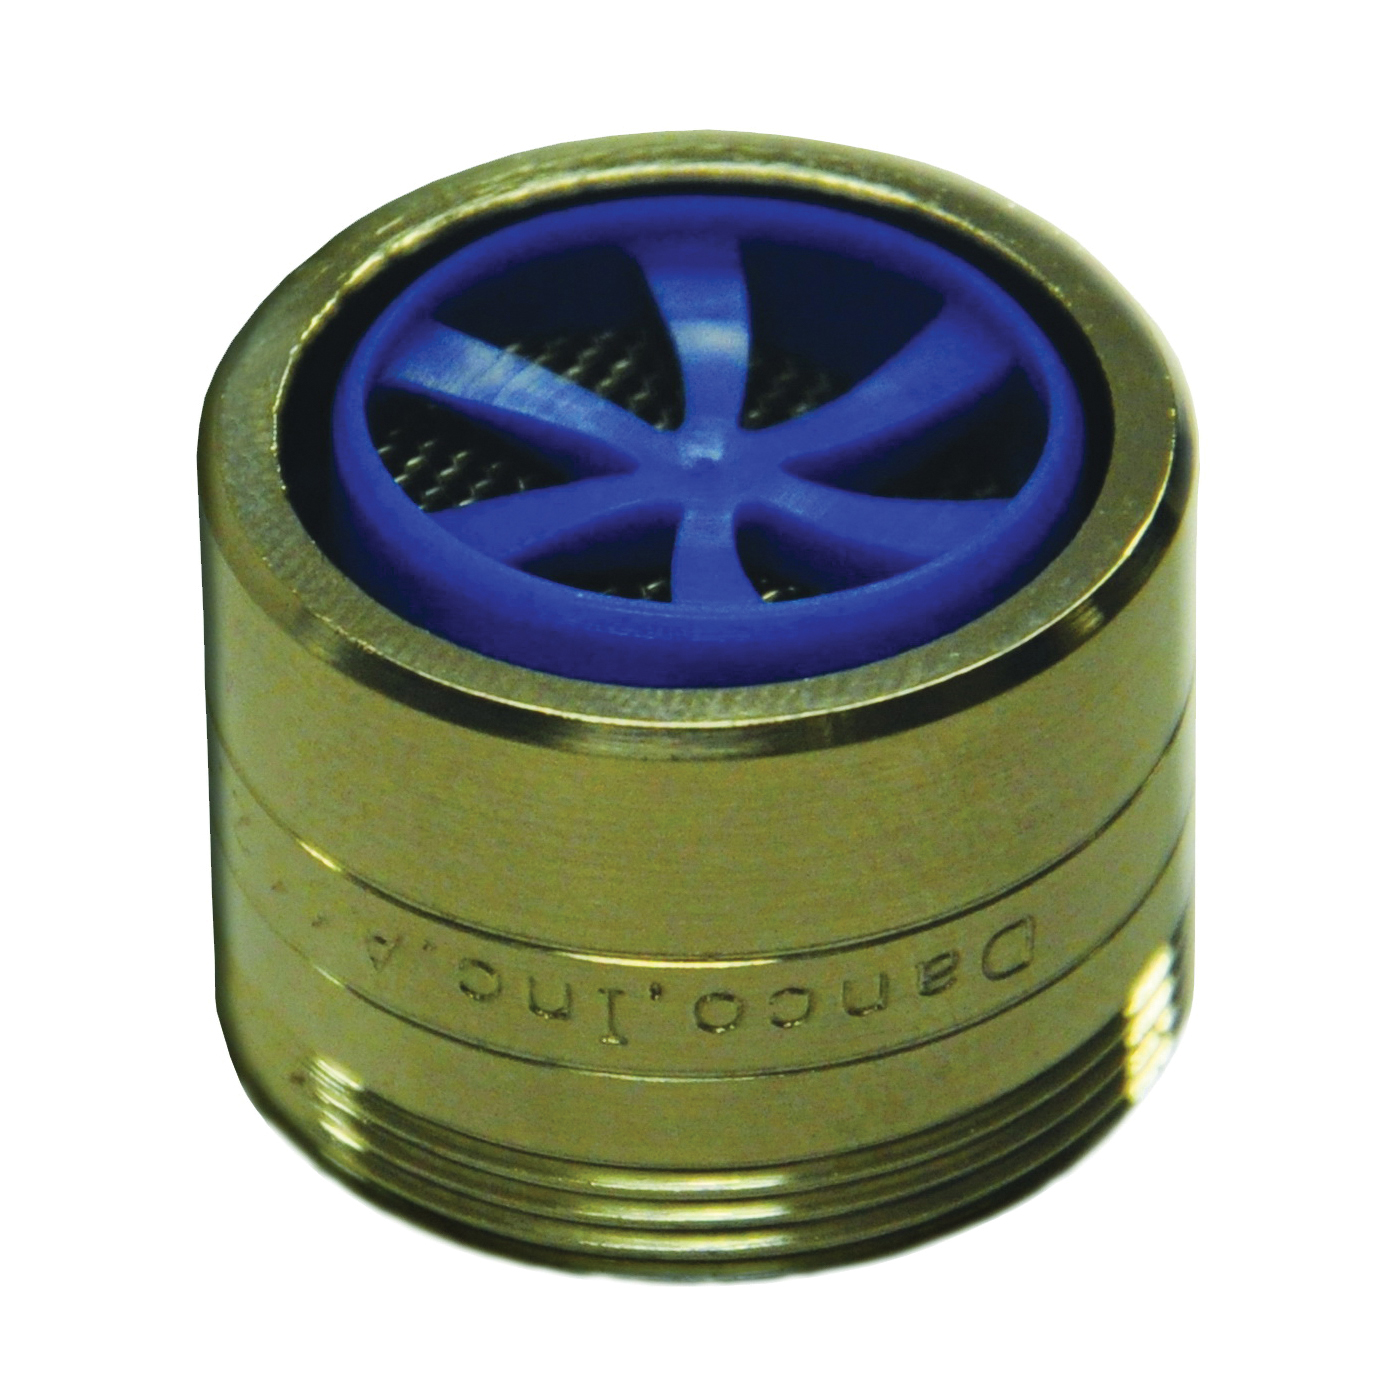 10477 Faucet Aerator, 15/16-27 x 55/64-27 Male x Female Thread, Brass, Brushed Nickel, 1.5 gpm